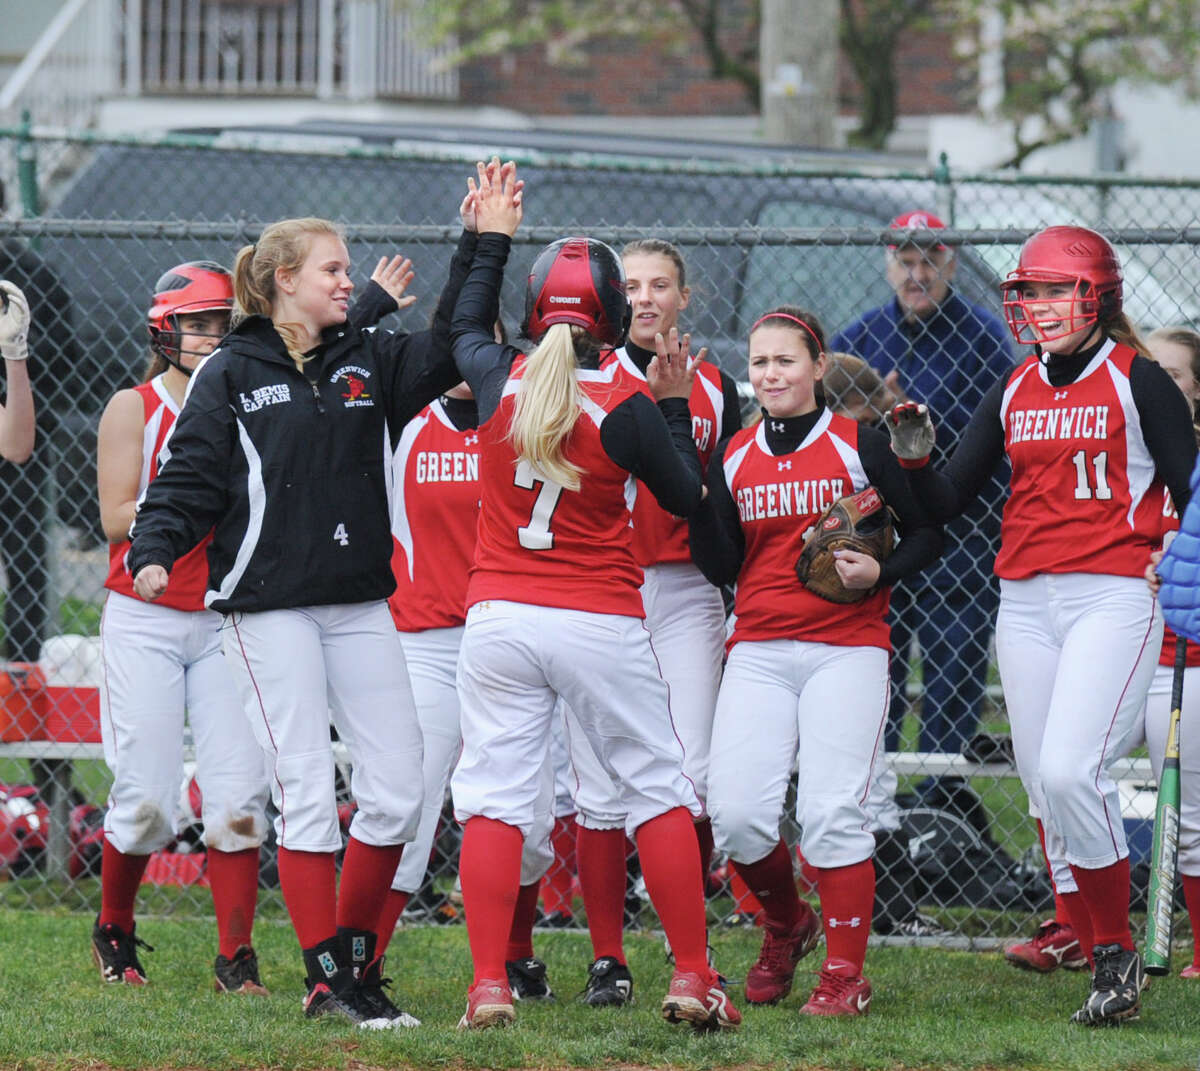 Rebecca DeCarlo # 7 of Greenwich High School is congratulated by teammates after hitting a three-run home run during the top of the second inning of softball game between Greenwich High School and Port Chester High School at Port Chester, N.Y., Thursday, May 3, 2012. Greenwich defeated Port Chester 23-0. At right for Greenwich is Ebba Mark # 11.